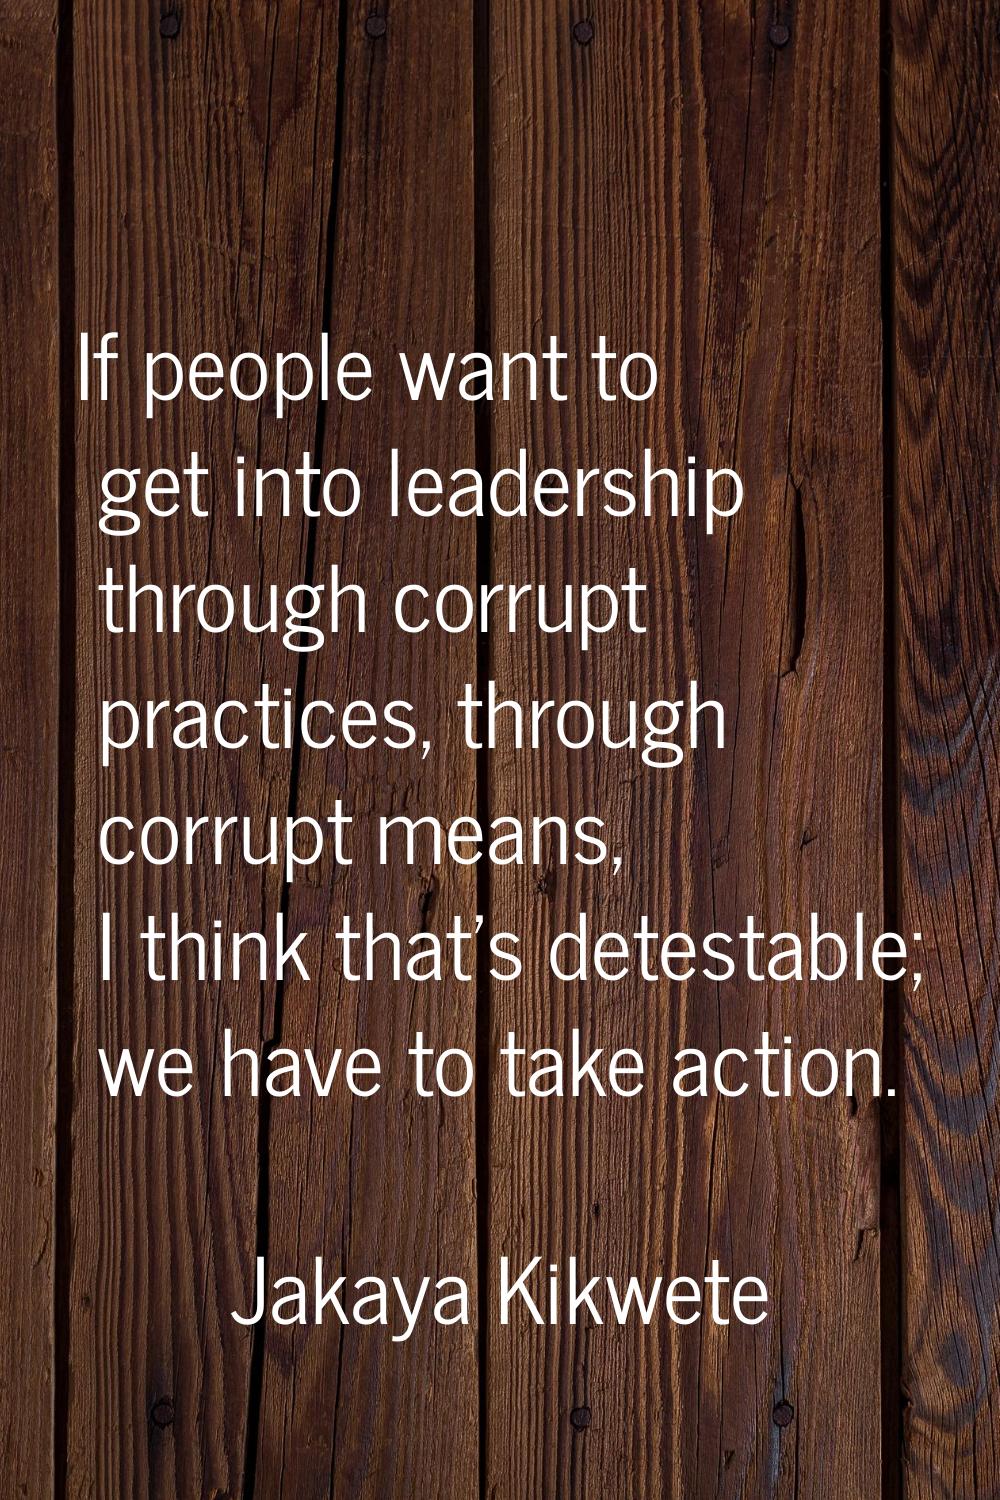 If people want to get into leadership through corrupt practices, through corrupt means, I think tha